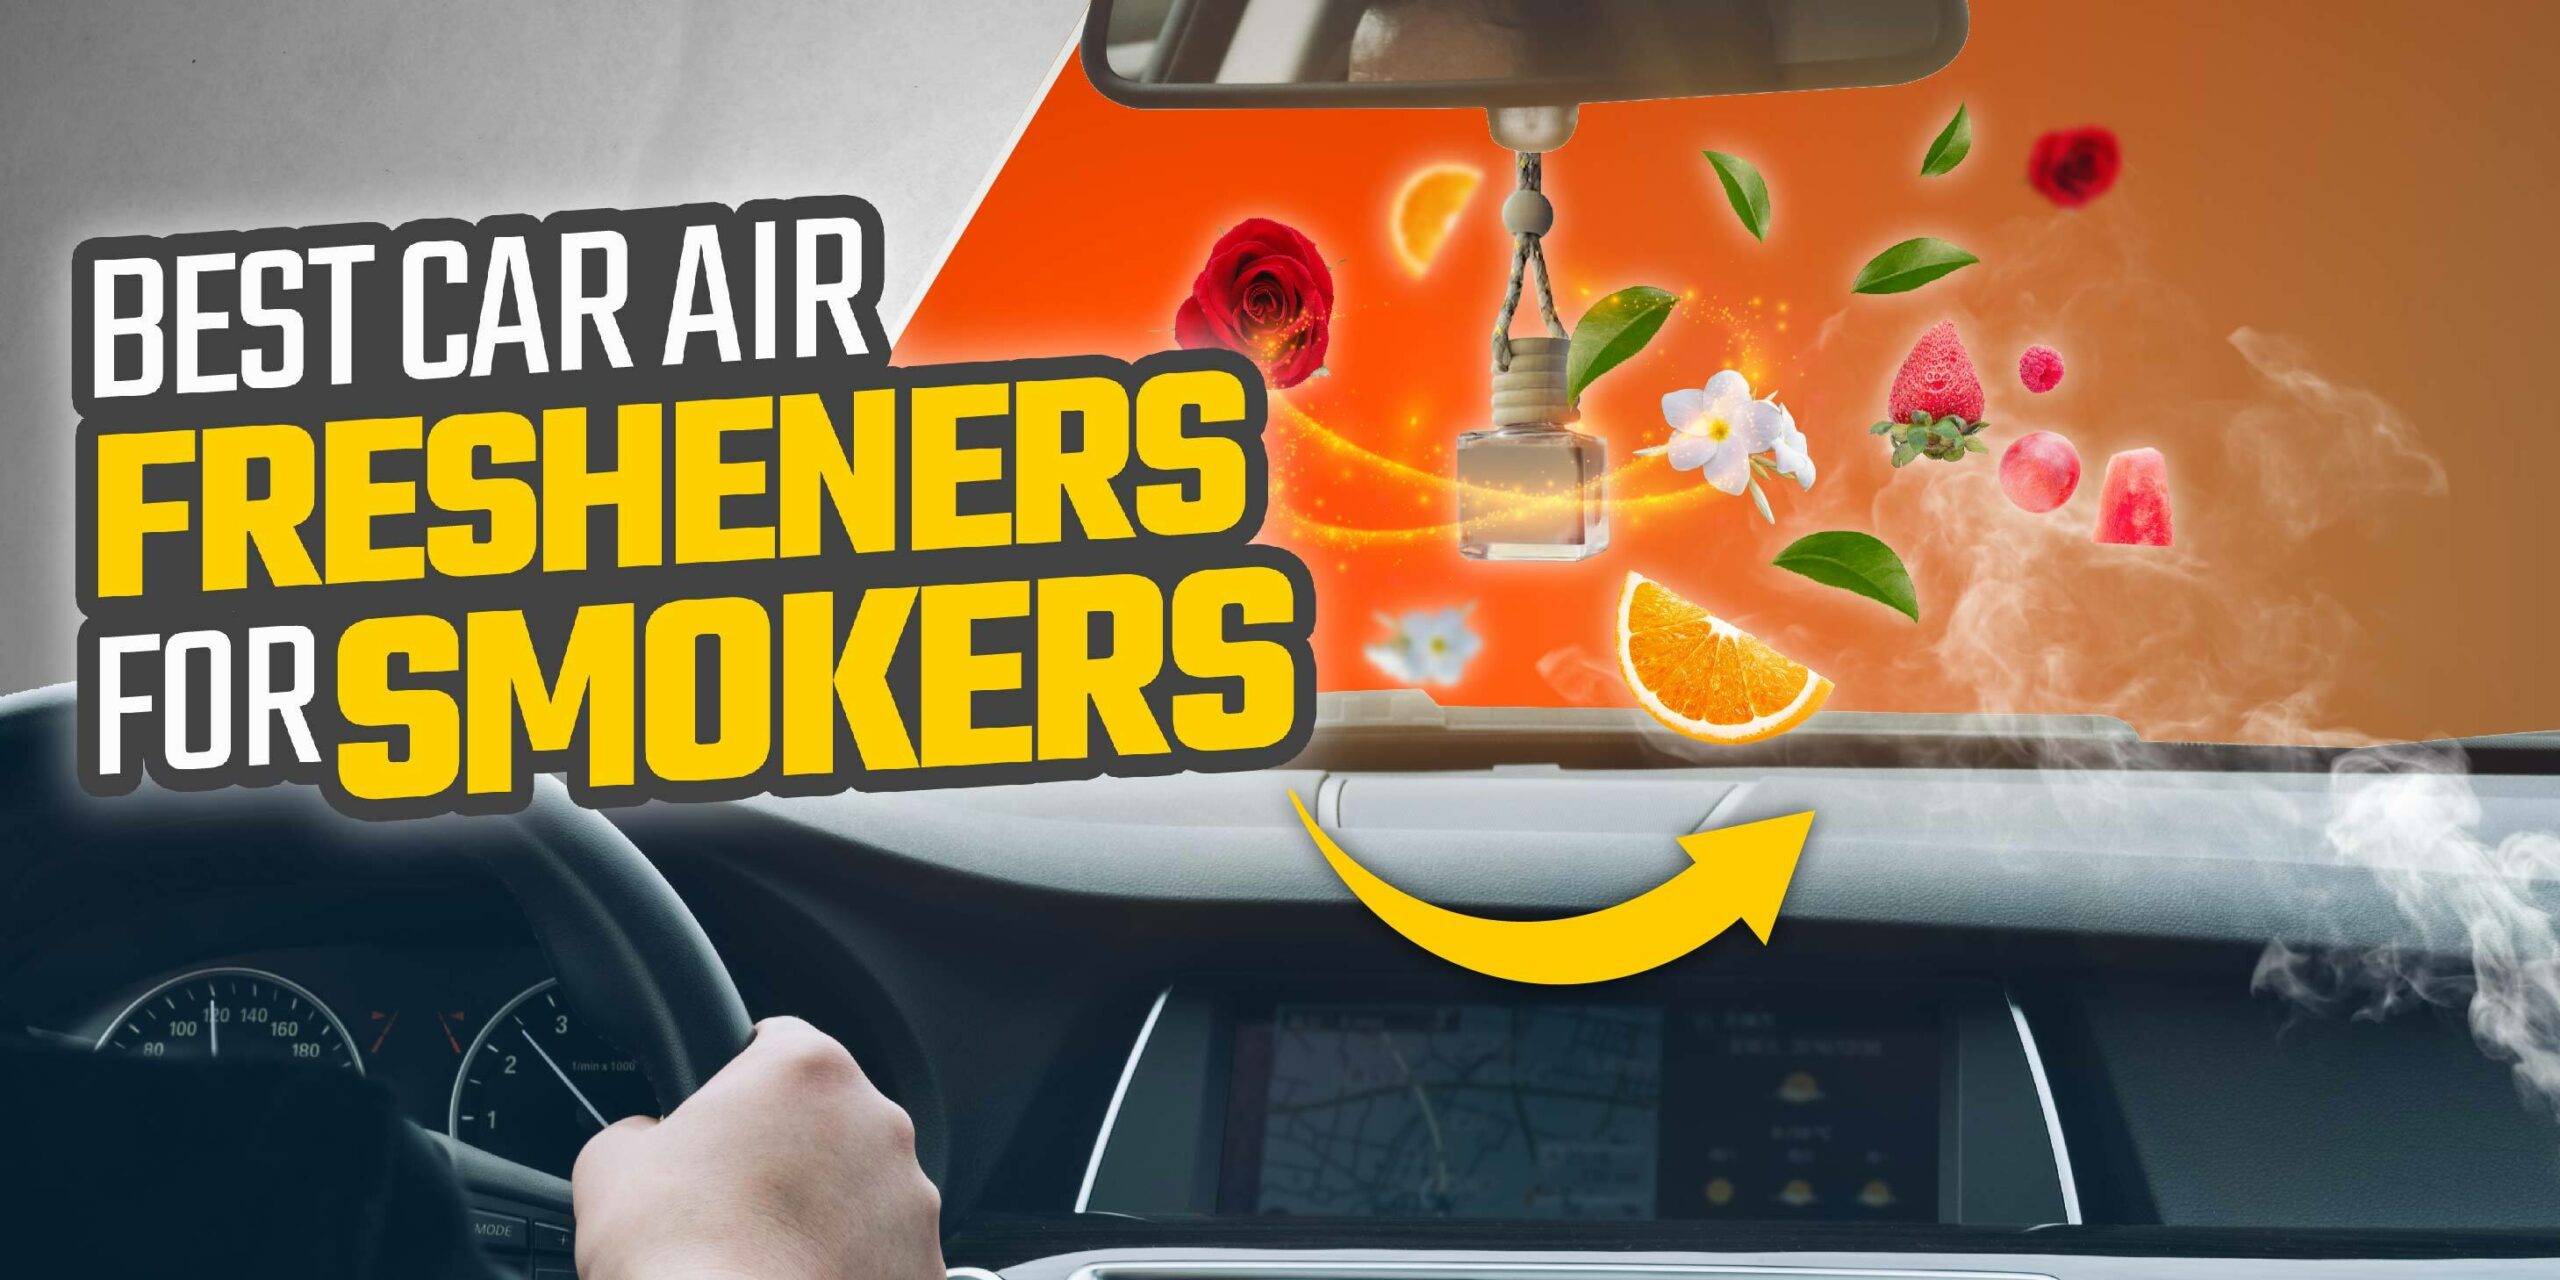 Guide To The Best Car Air Fresheners For Smokers - Carorbis